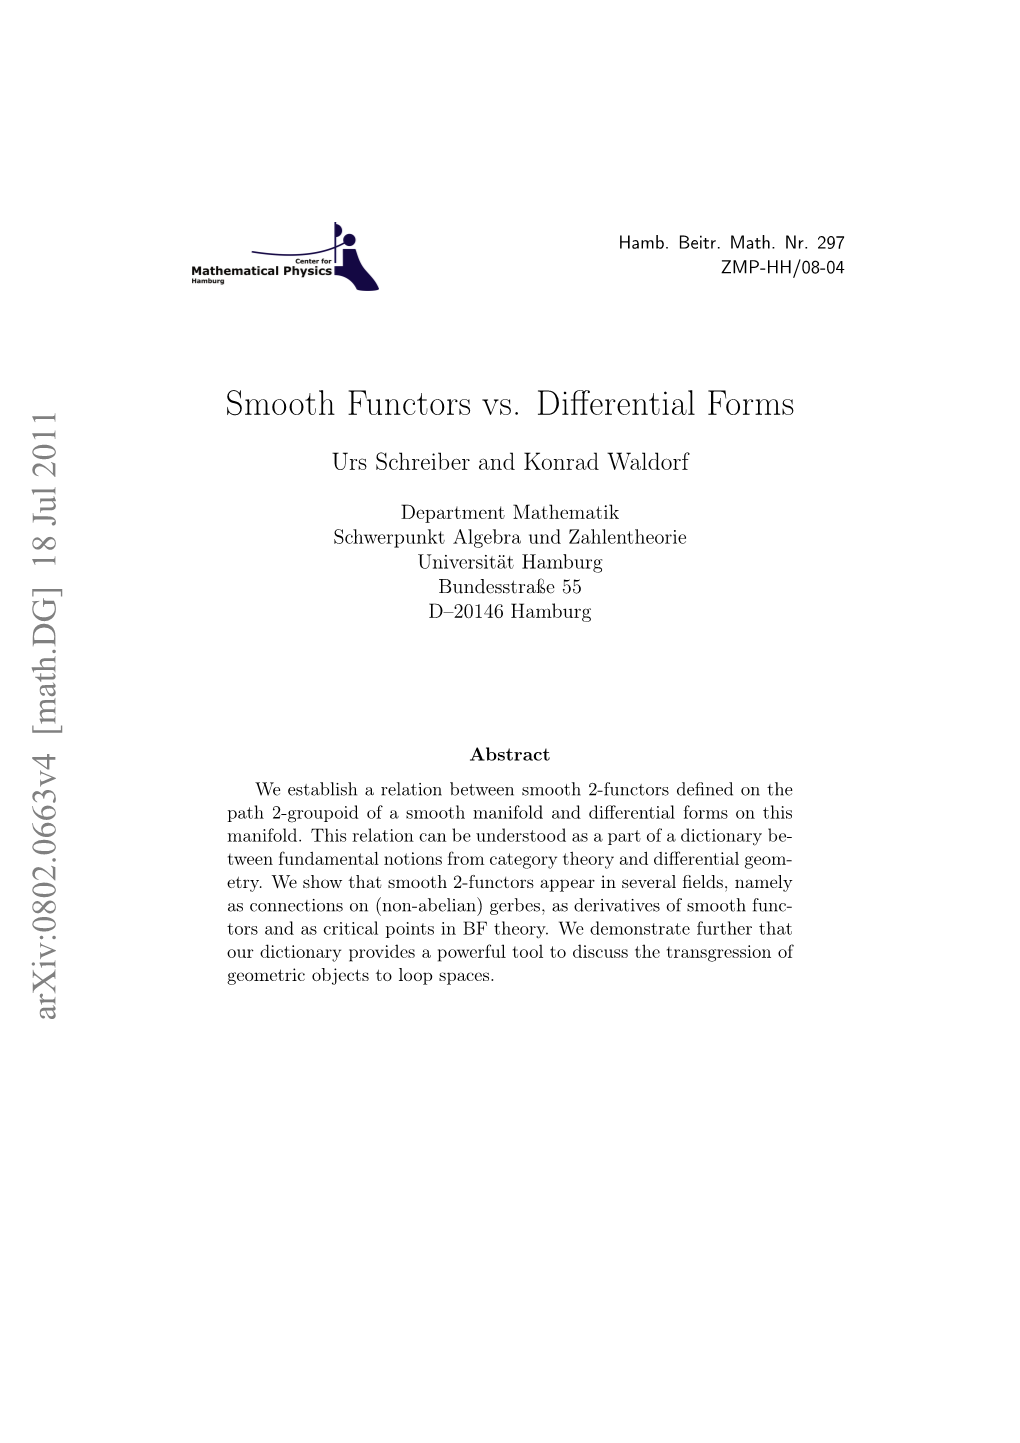 Smooth Functors Vs. Differential Forms